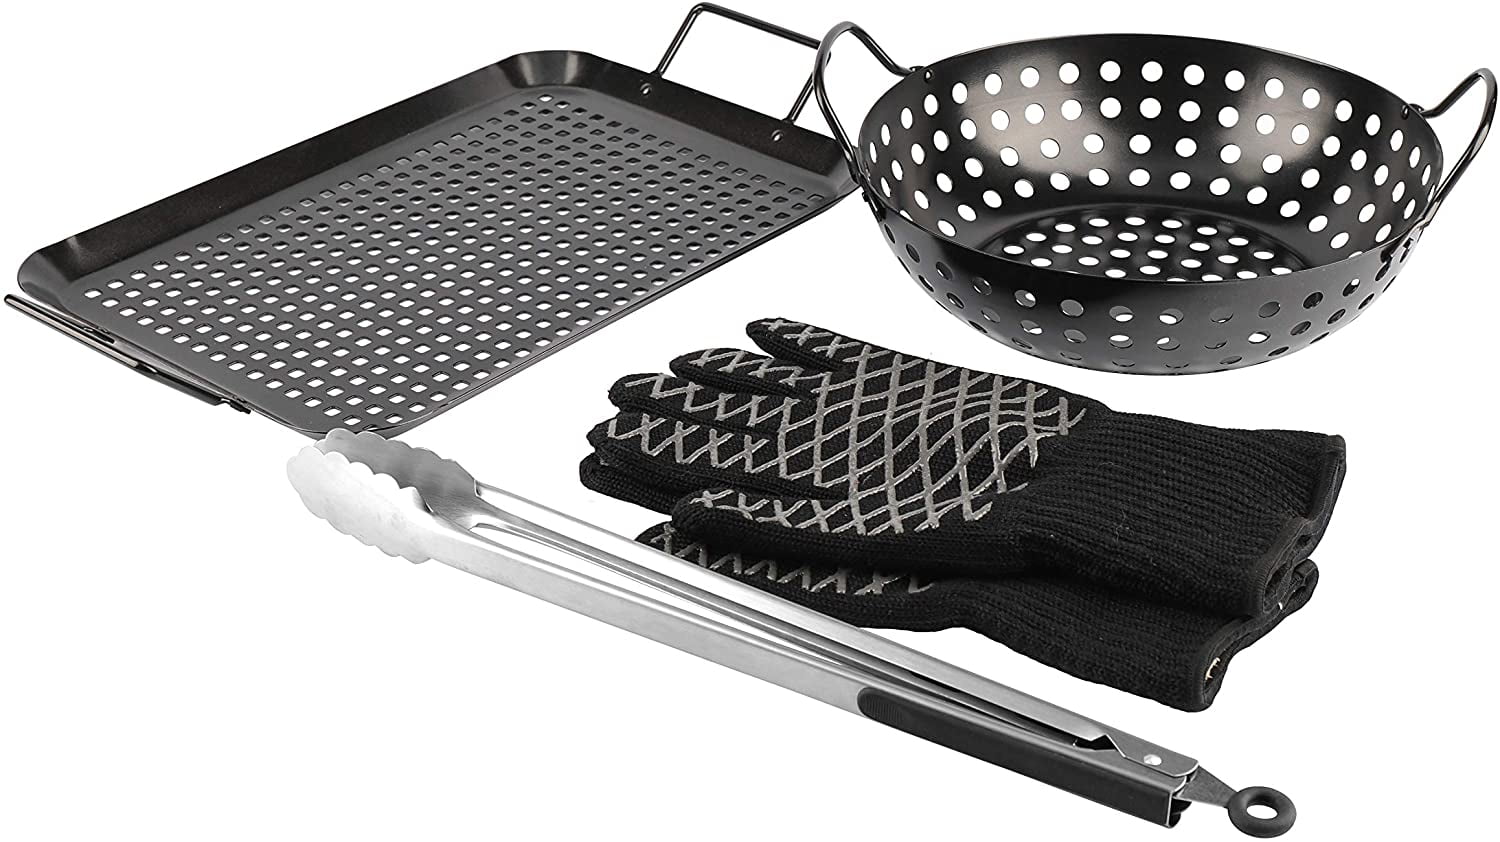 PITMASTER KING Grill Topper BBQ Grilling Stainless Steel Pan and Tray  6-Piece Set for Indoor/Outdoor Cooking w/Tongs and Heat Gloves 850008244247  - The Home Depot